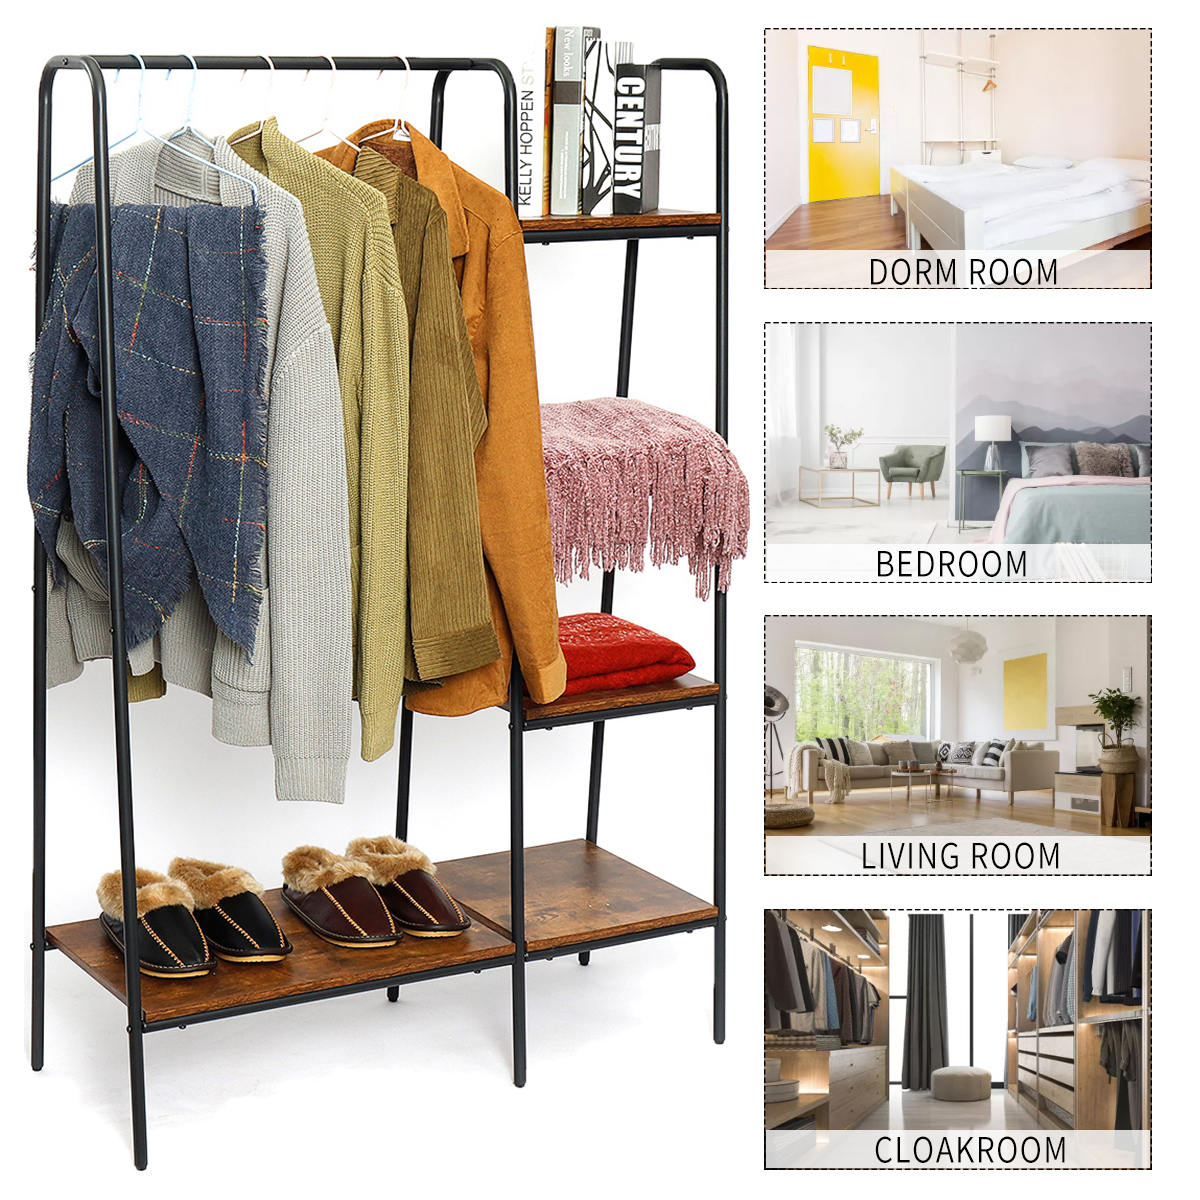 Metal Garment Rack Home Storage Rack Hanging Clothing Bar with Multi Wooden Shelves 60" x 40" - image 5 of 12